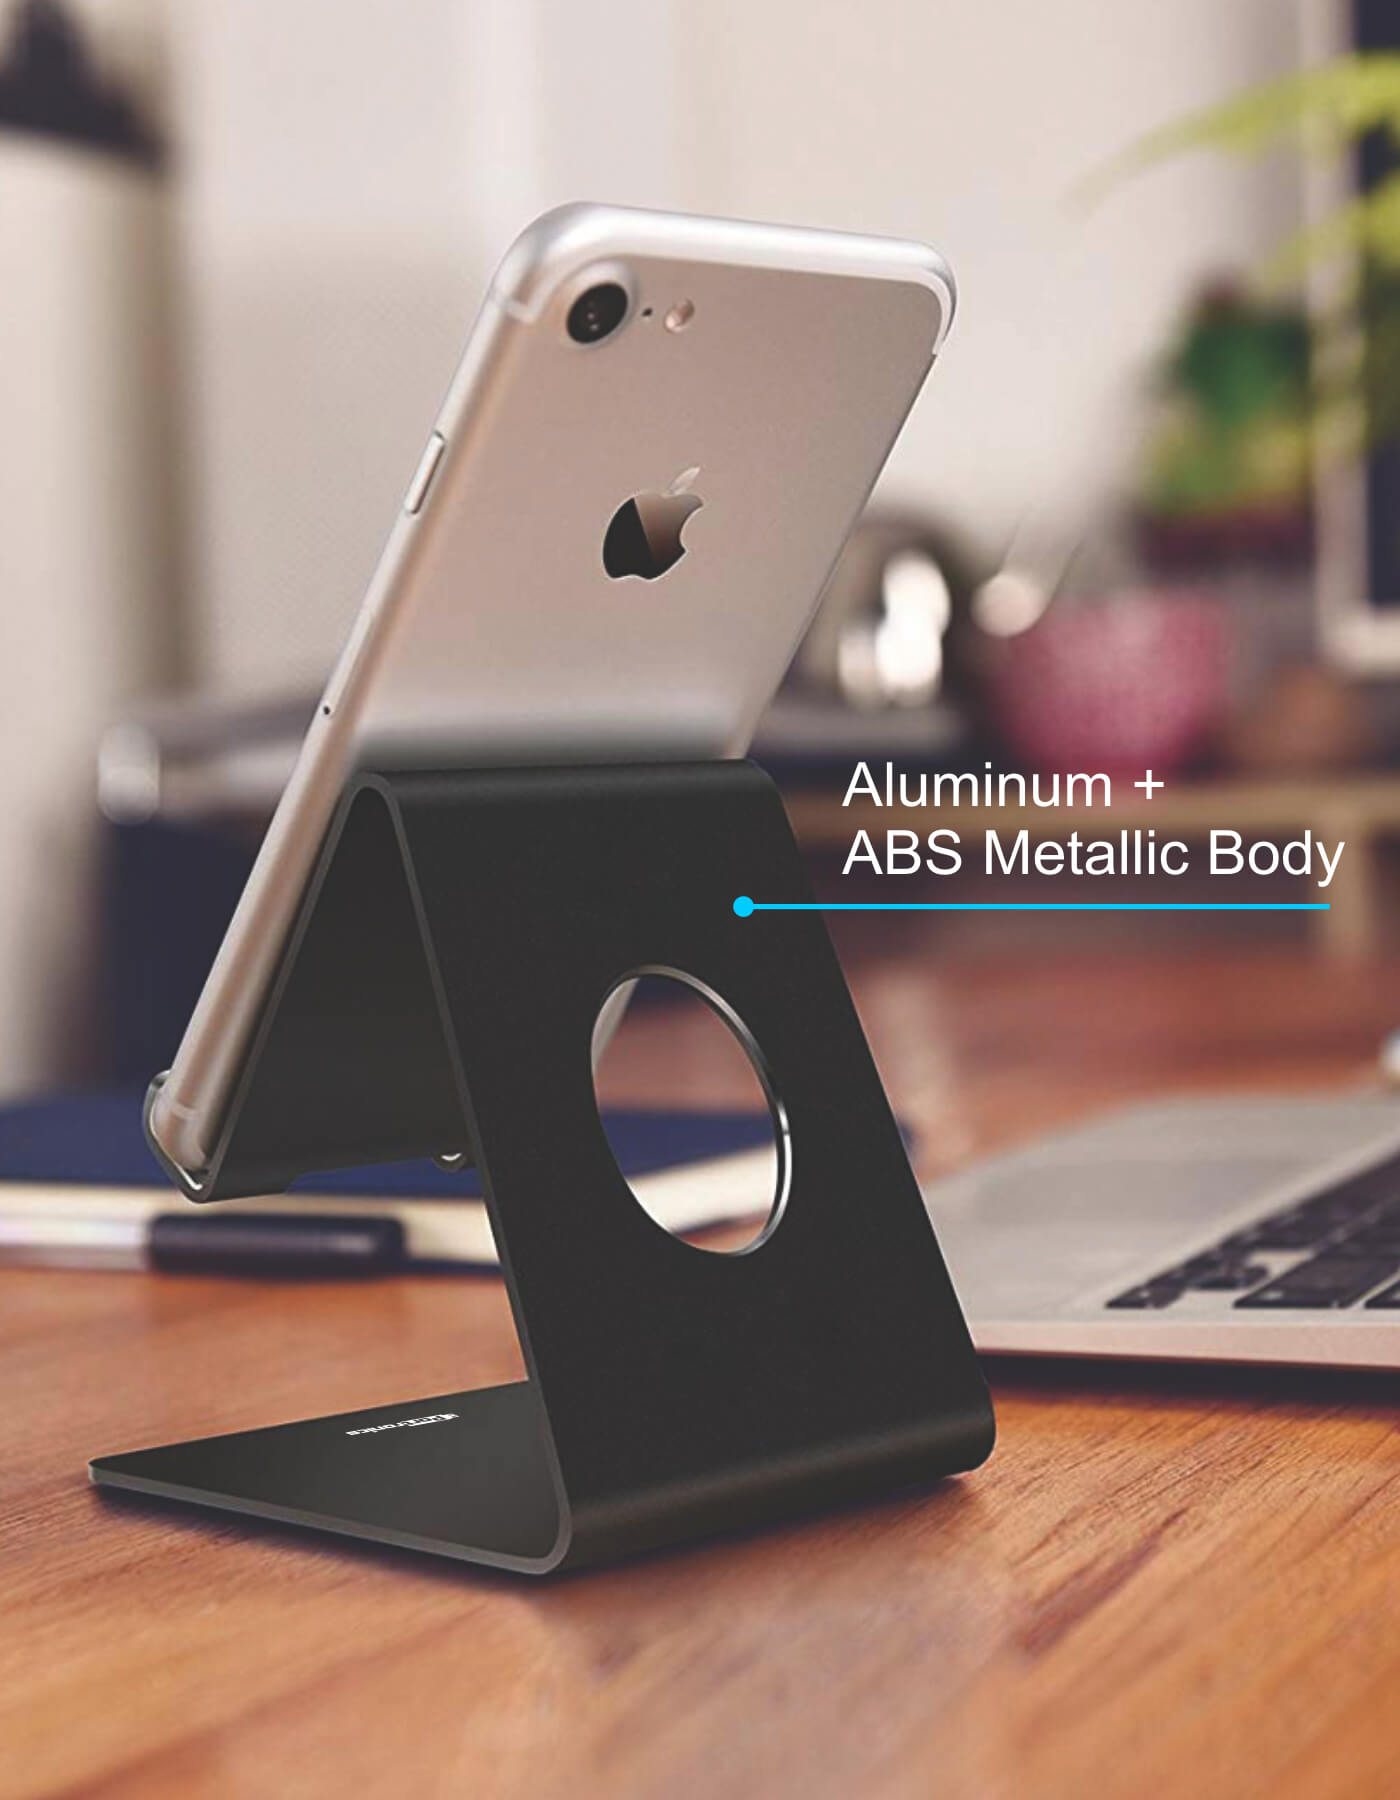 ABS meatalic body on Portronics Modesk Phone | Mobile Stand/Holder